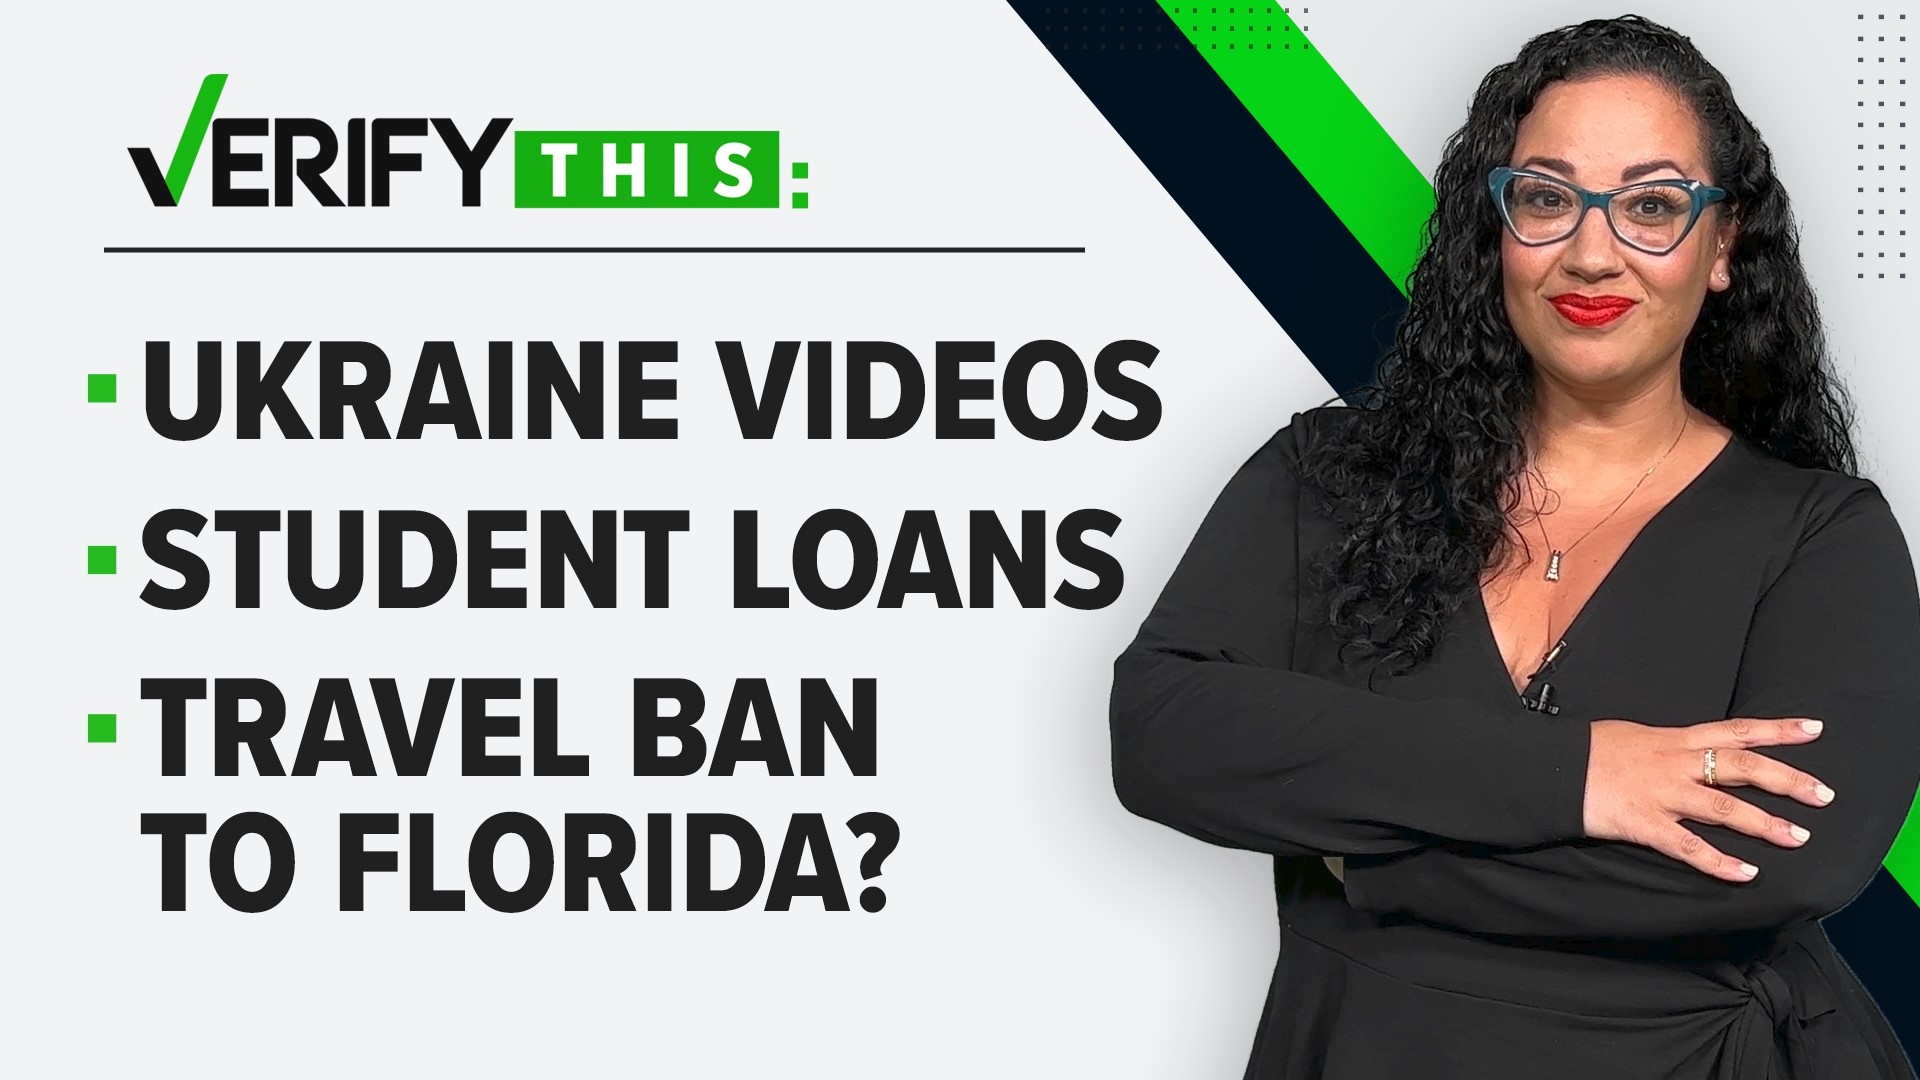 We verify claims about Ukraine videos, an executive order on insulin, student loans and more